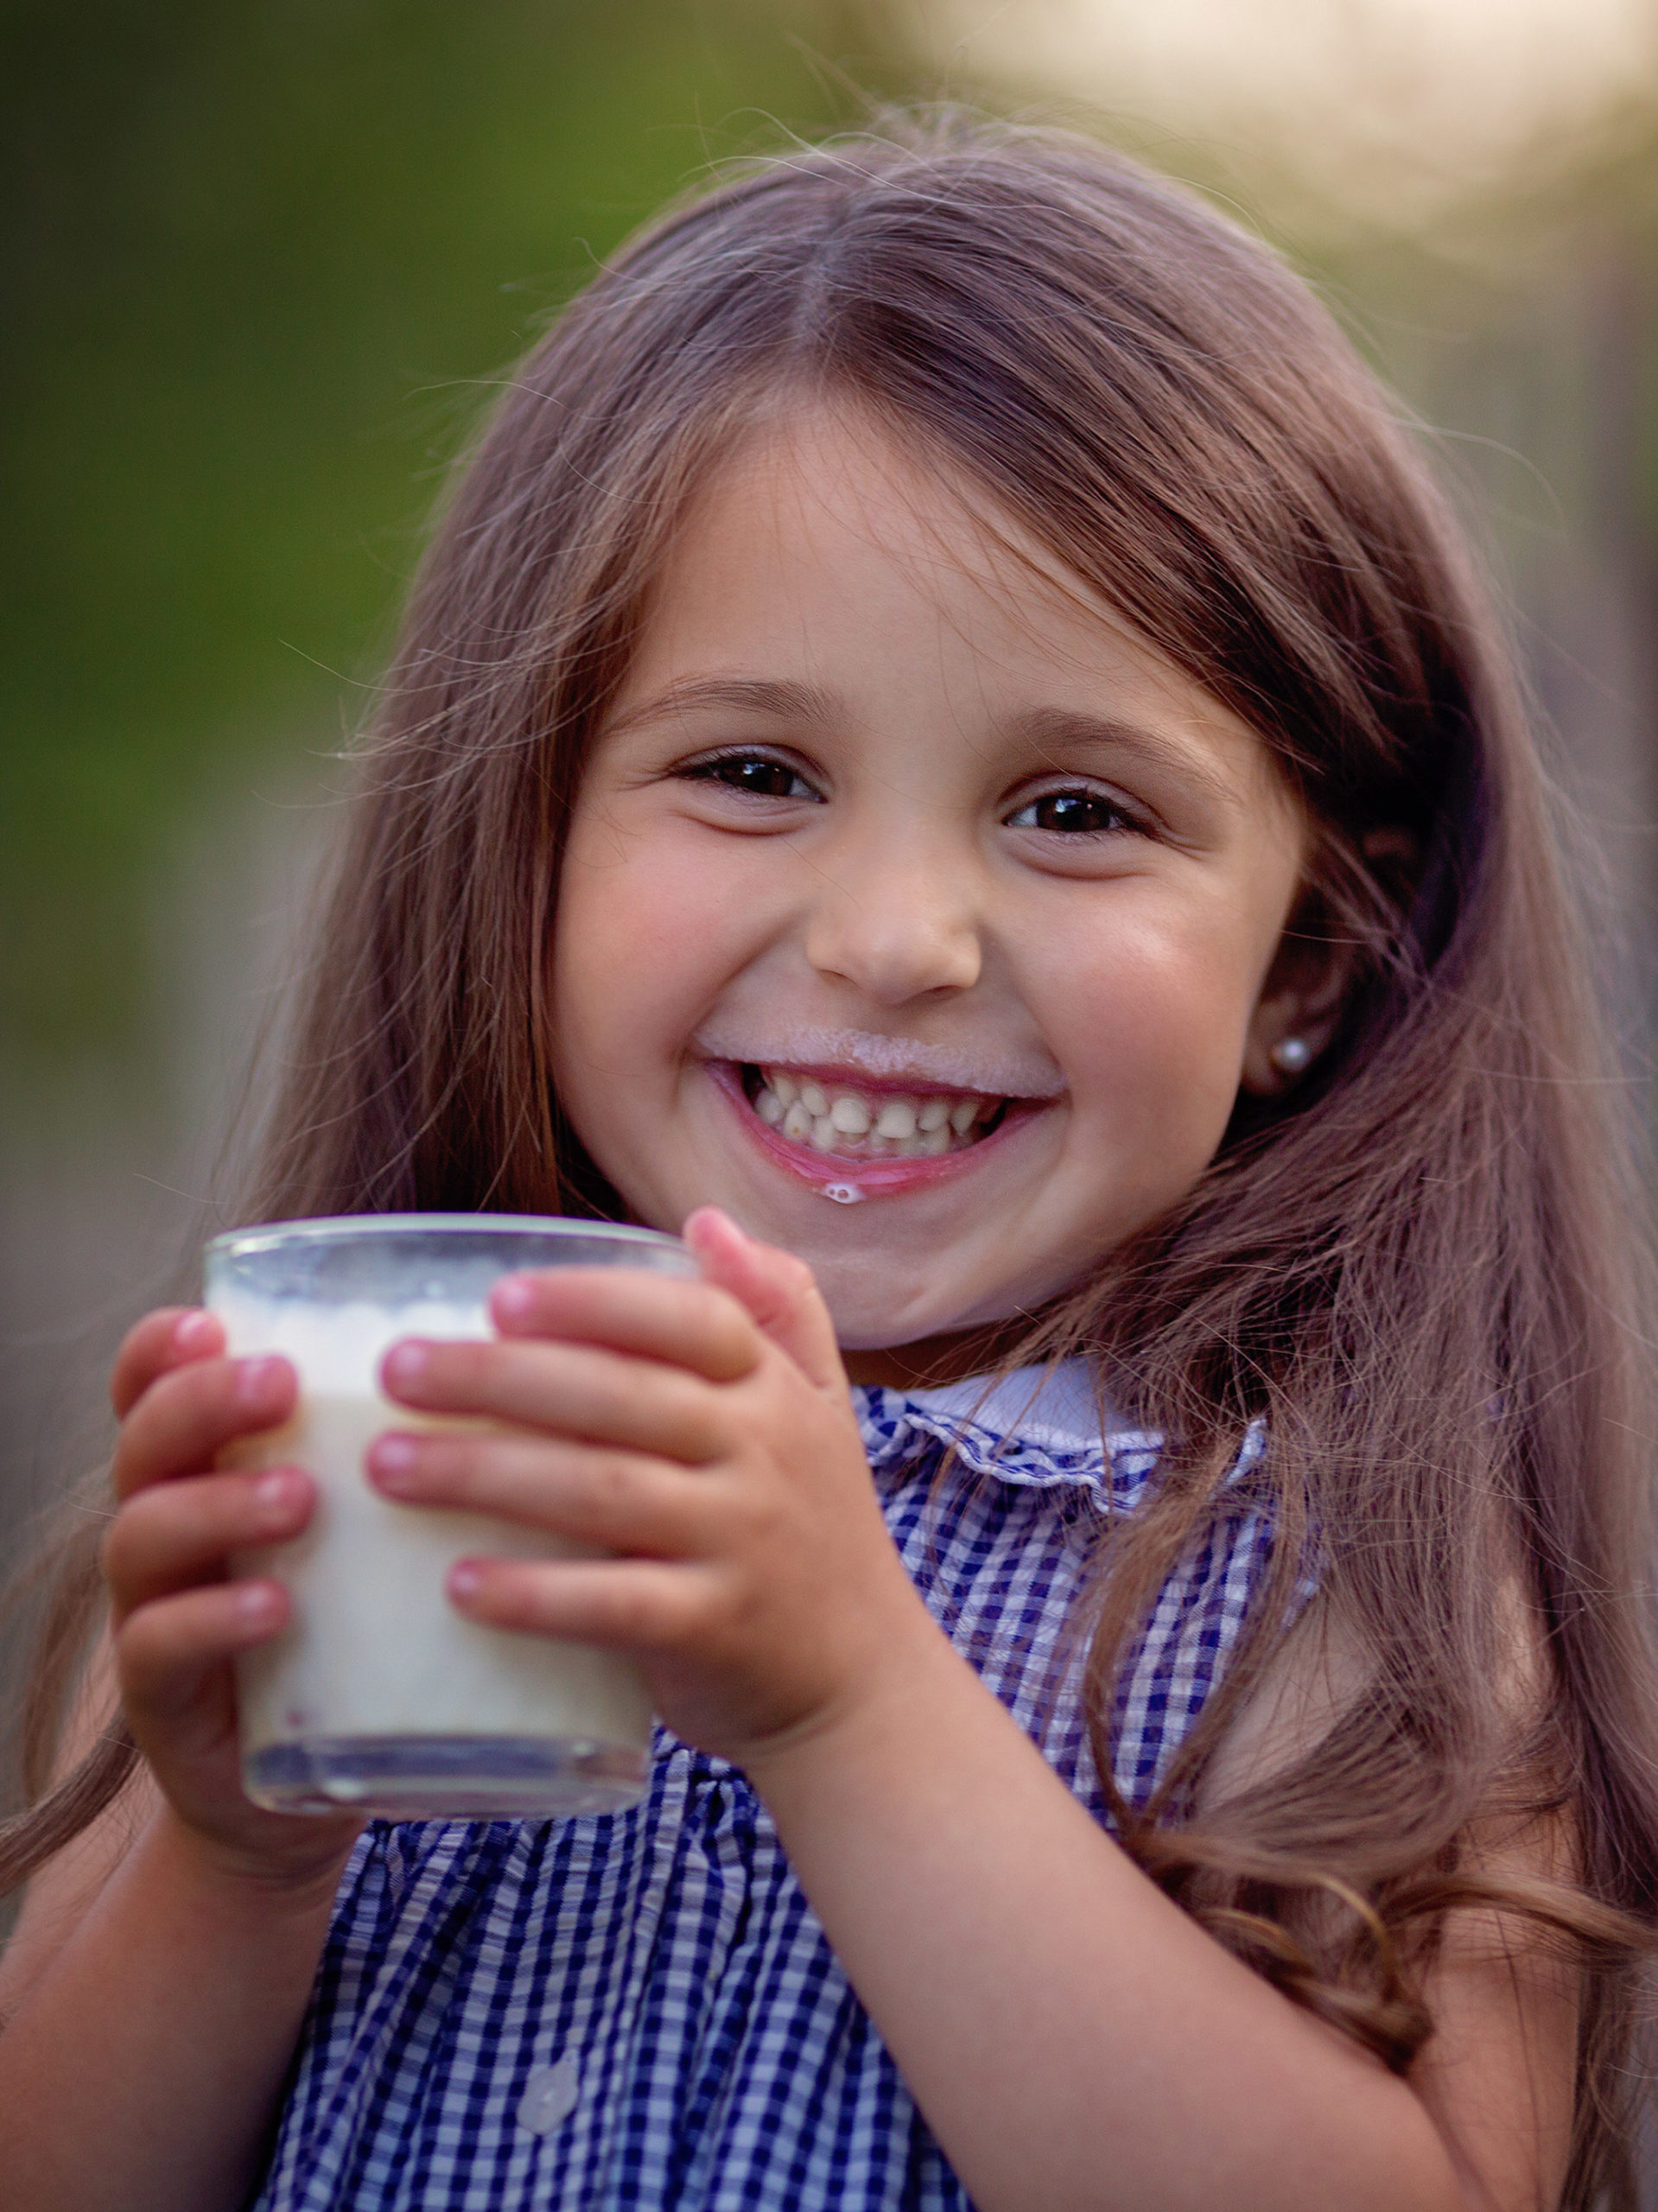 little girl smiling and drinking a glass of milk